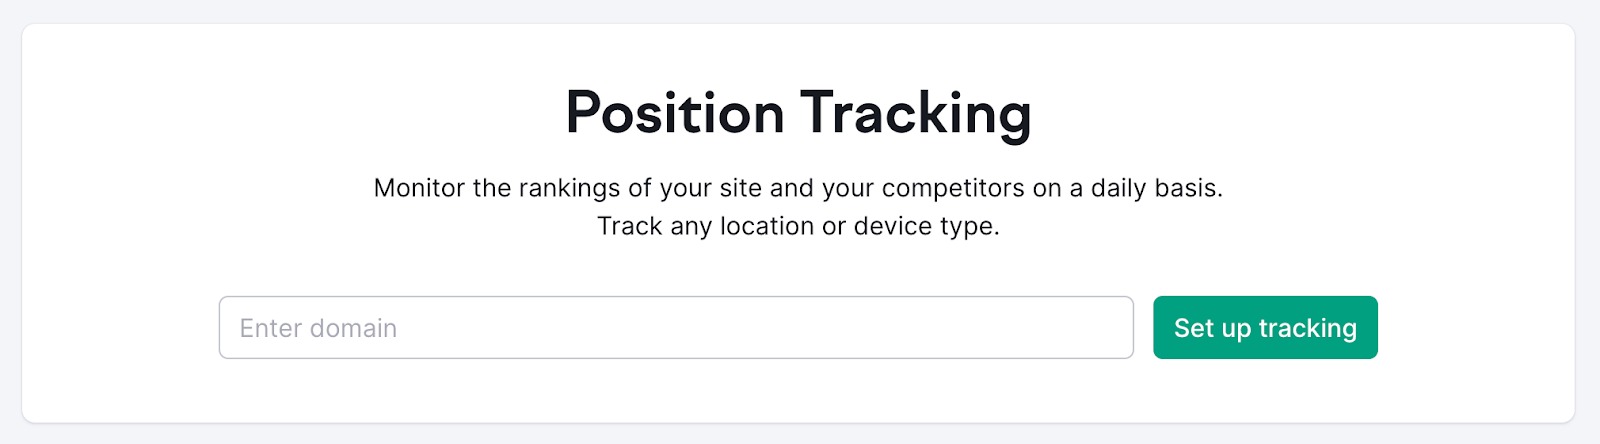 Create Position Tracking campaign page without projects being set up before.